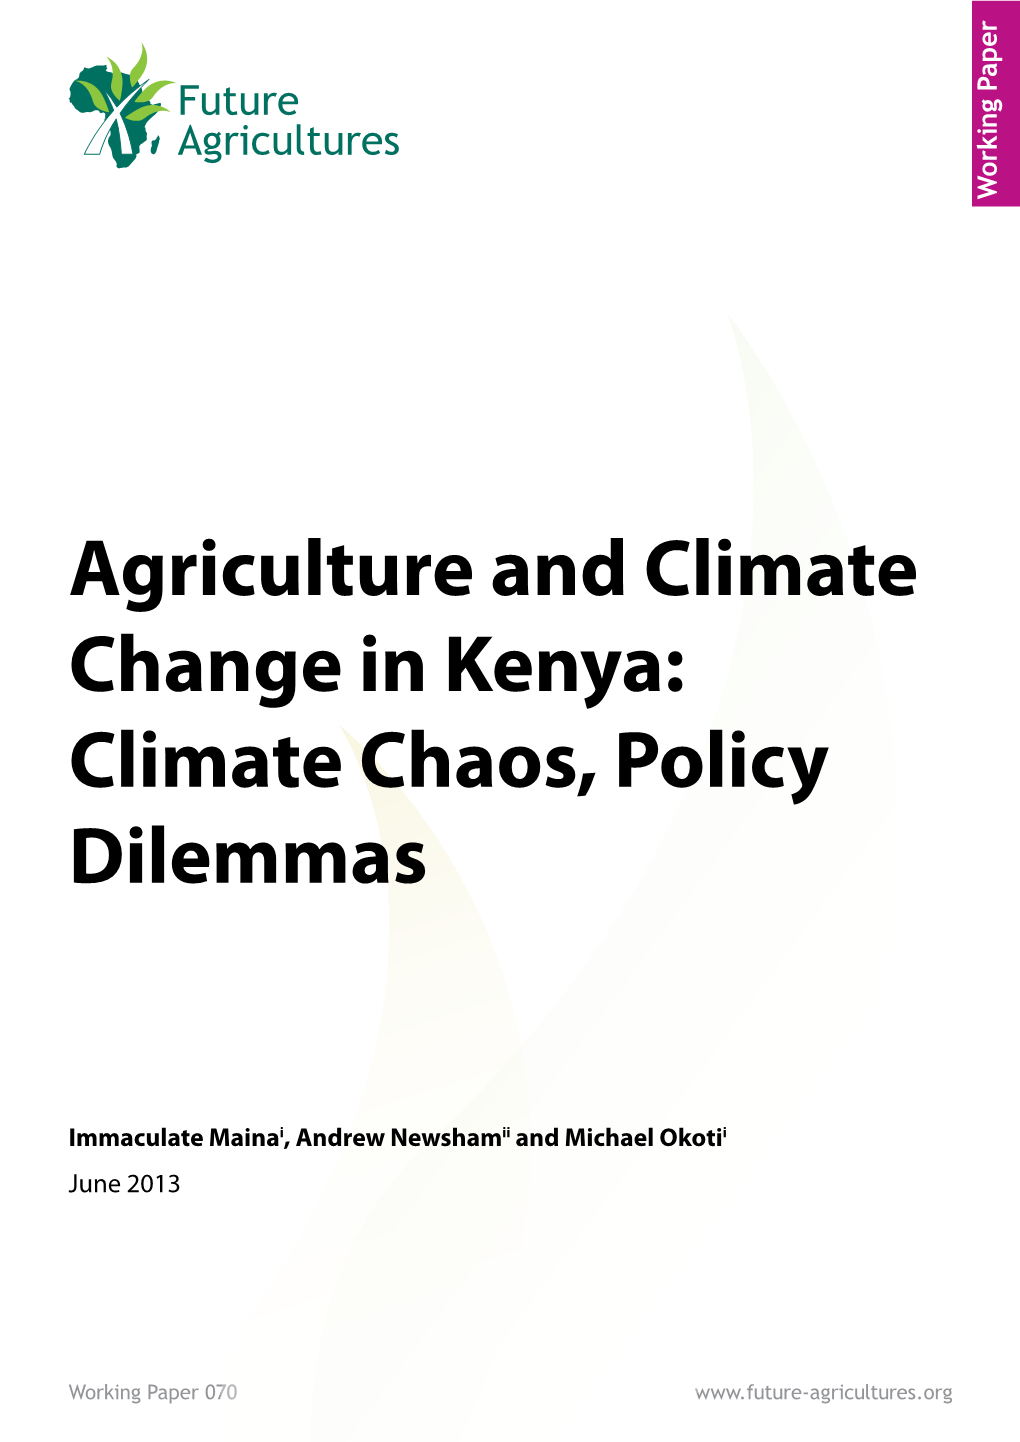 Agriculture and Climate Change in Kenya: Climate Chaos, Policy Dilemmas